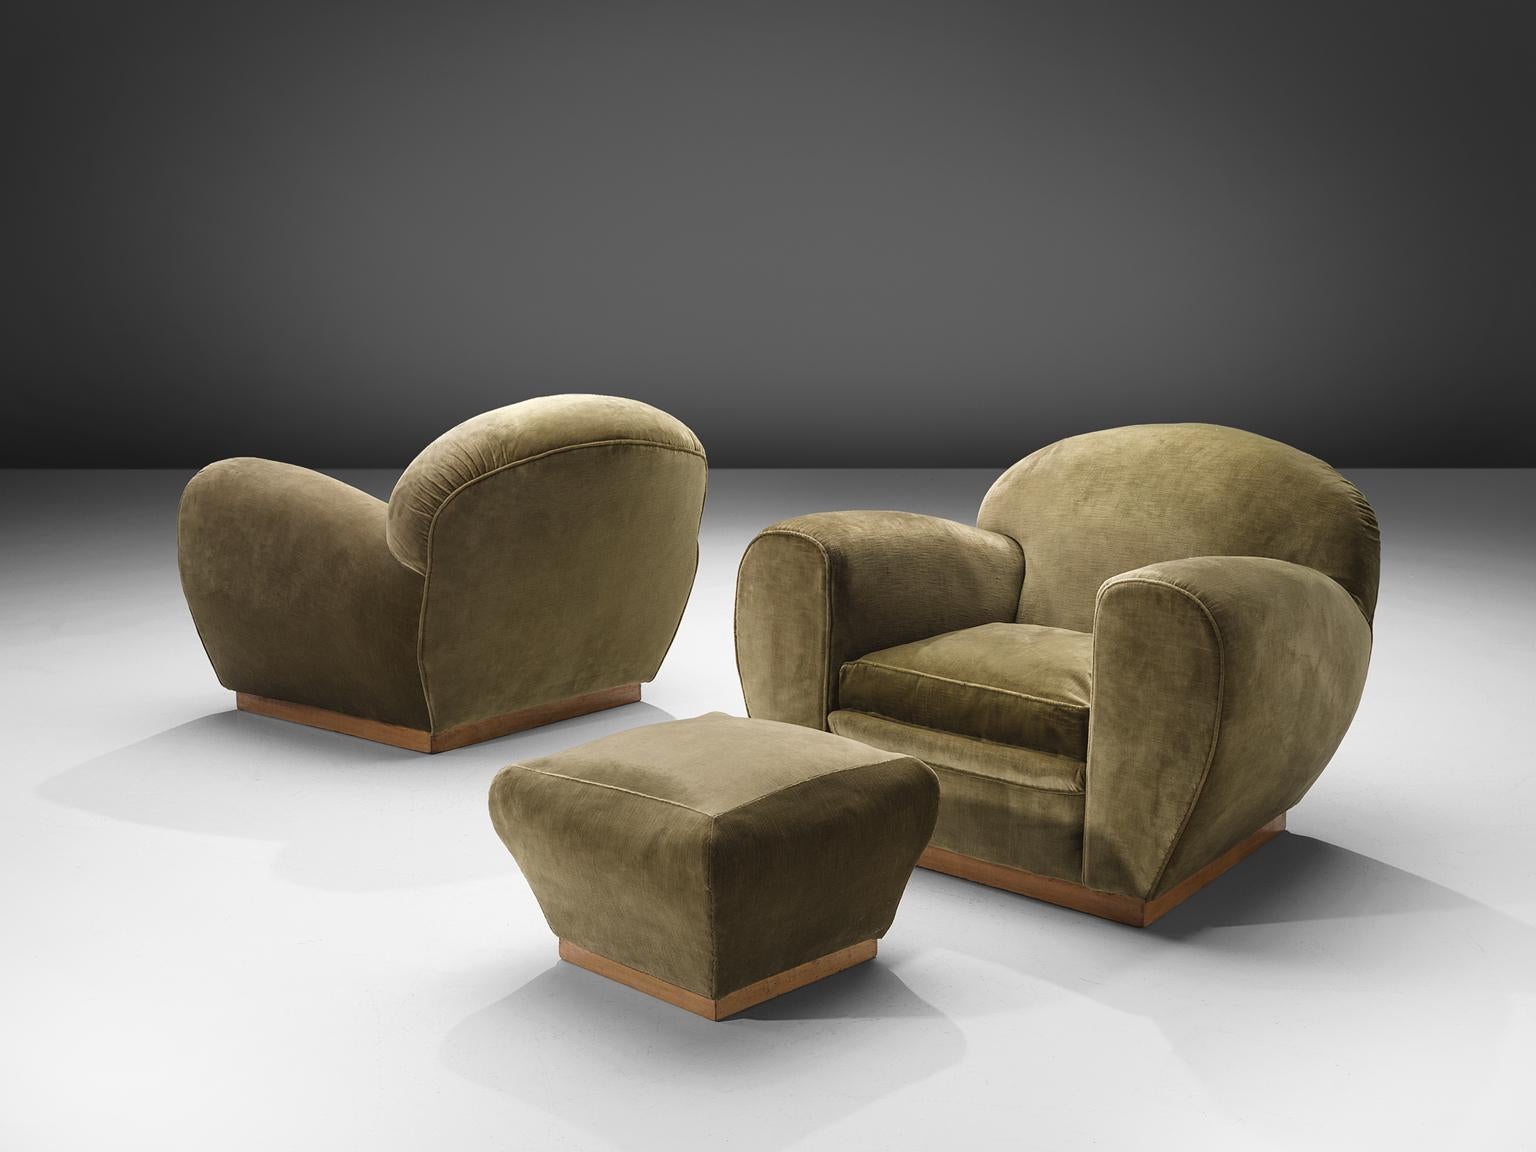 Lounge chairs and ottomans, green velvet fabric, Italy, 1940s. 

Wide and comfortable chair in green velvet fabric upholstery. Truly extraordinary luxurious lounge chairs that features a very deep seat and rounded, curved armrests. This piece is as